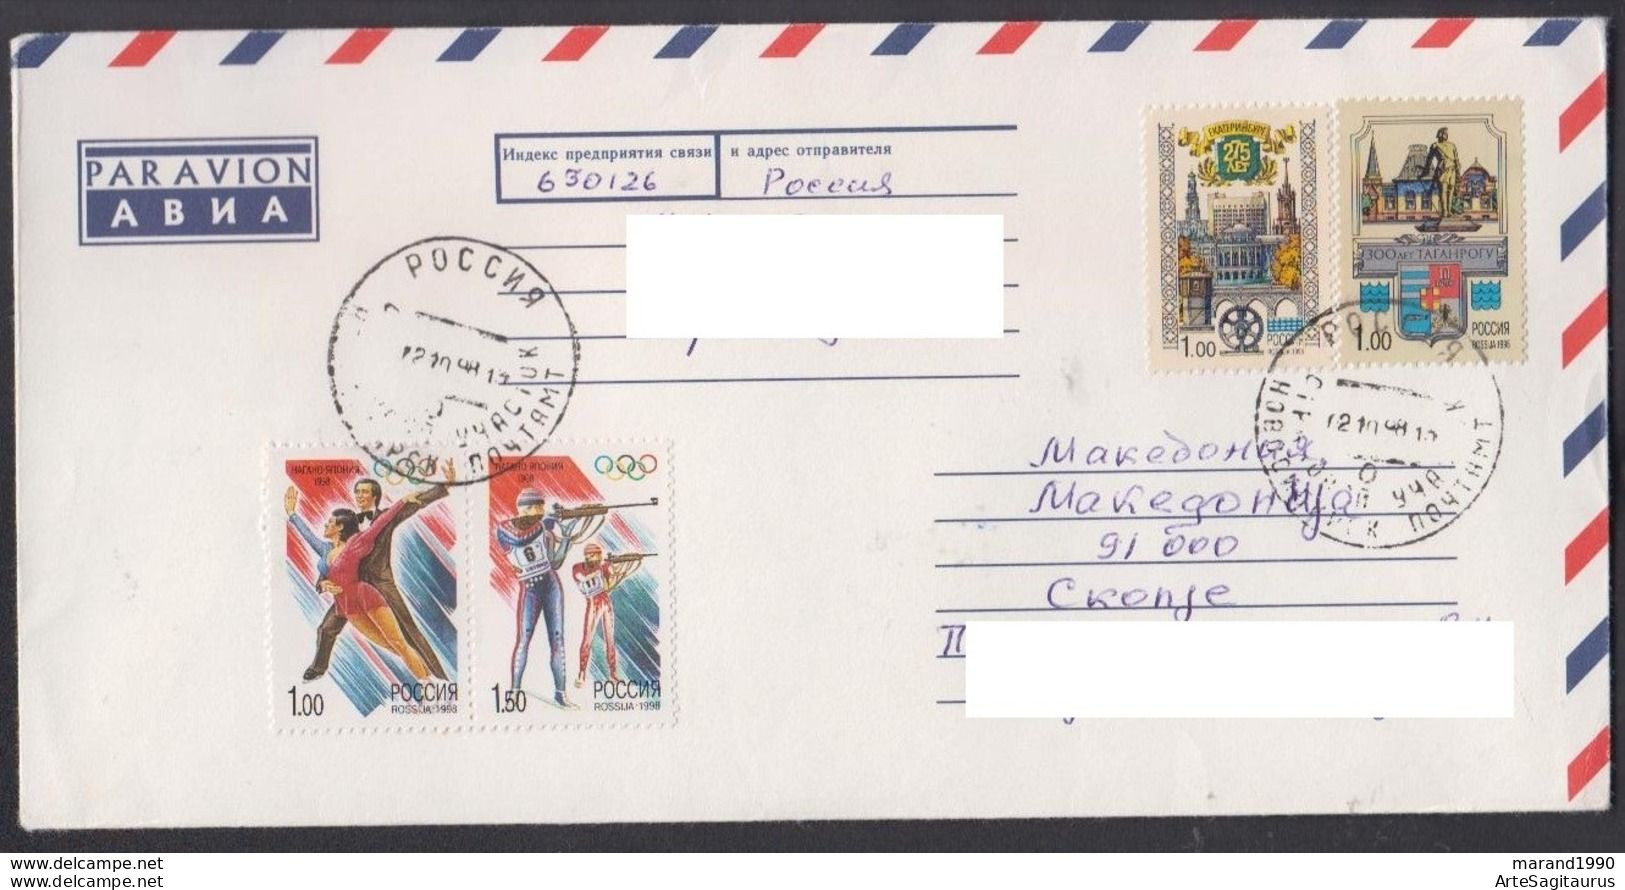 ROSSIA COVER SPORT AIR MAIL REPUBLIC OF MACEDONIA (006) - Covers & Documents